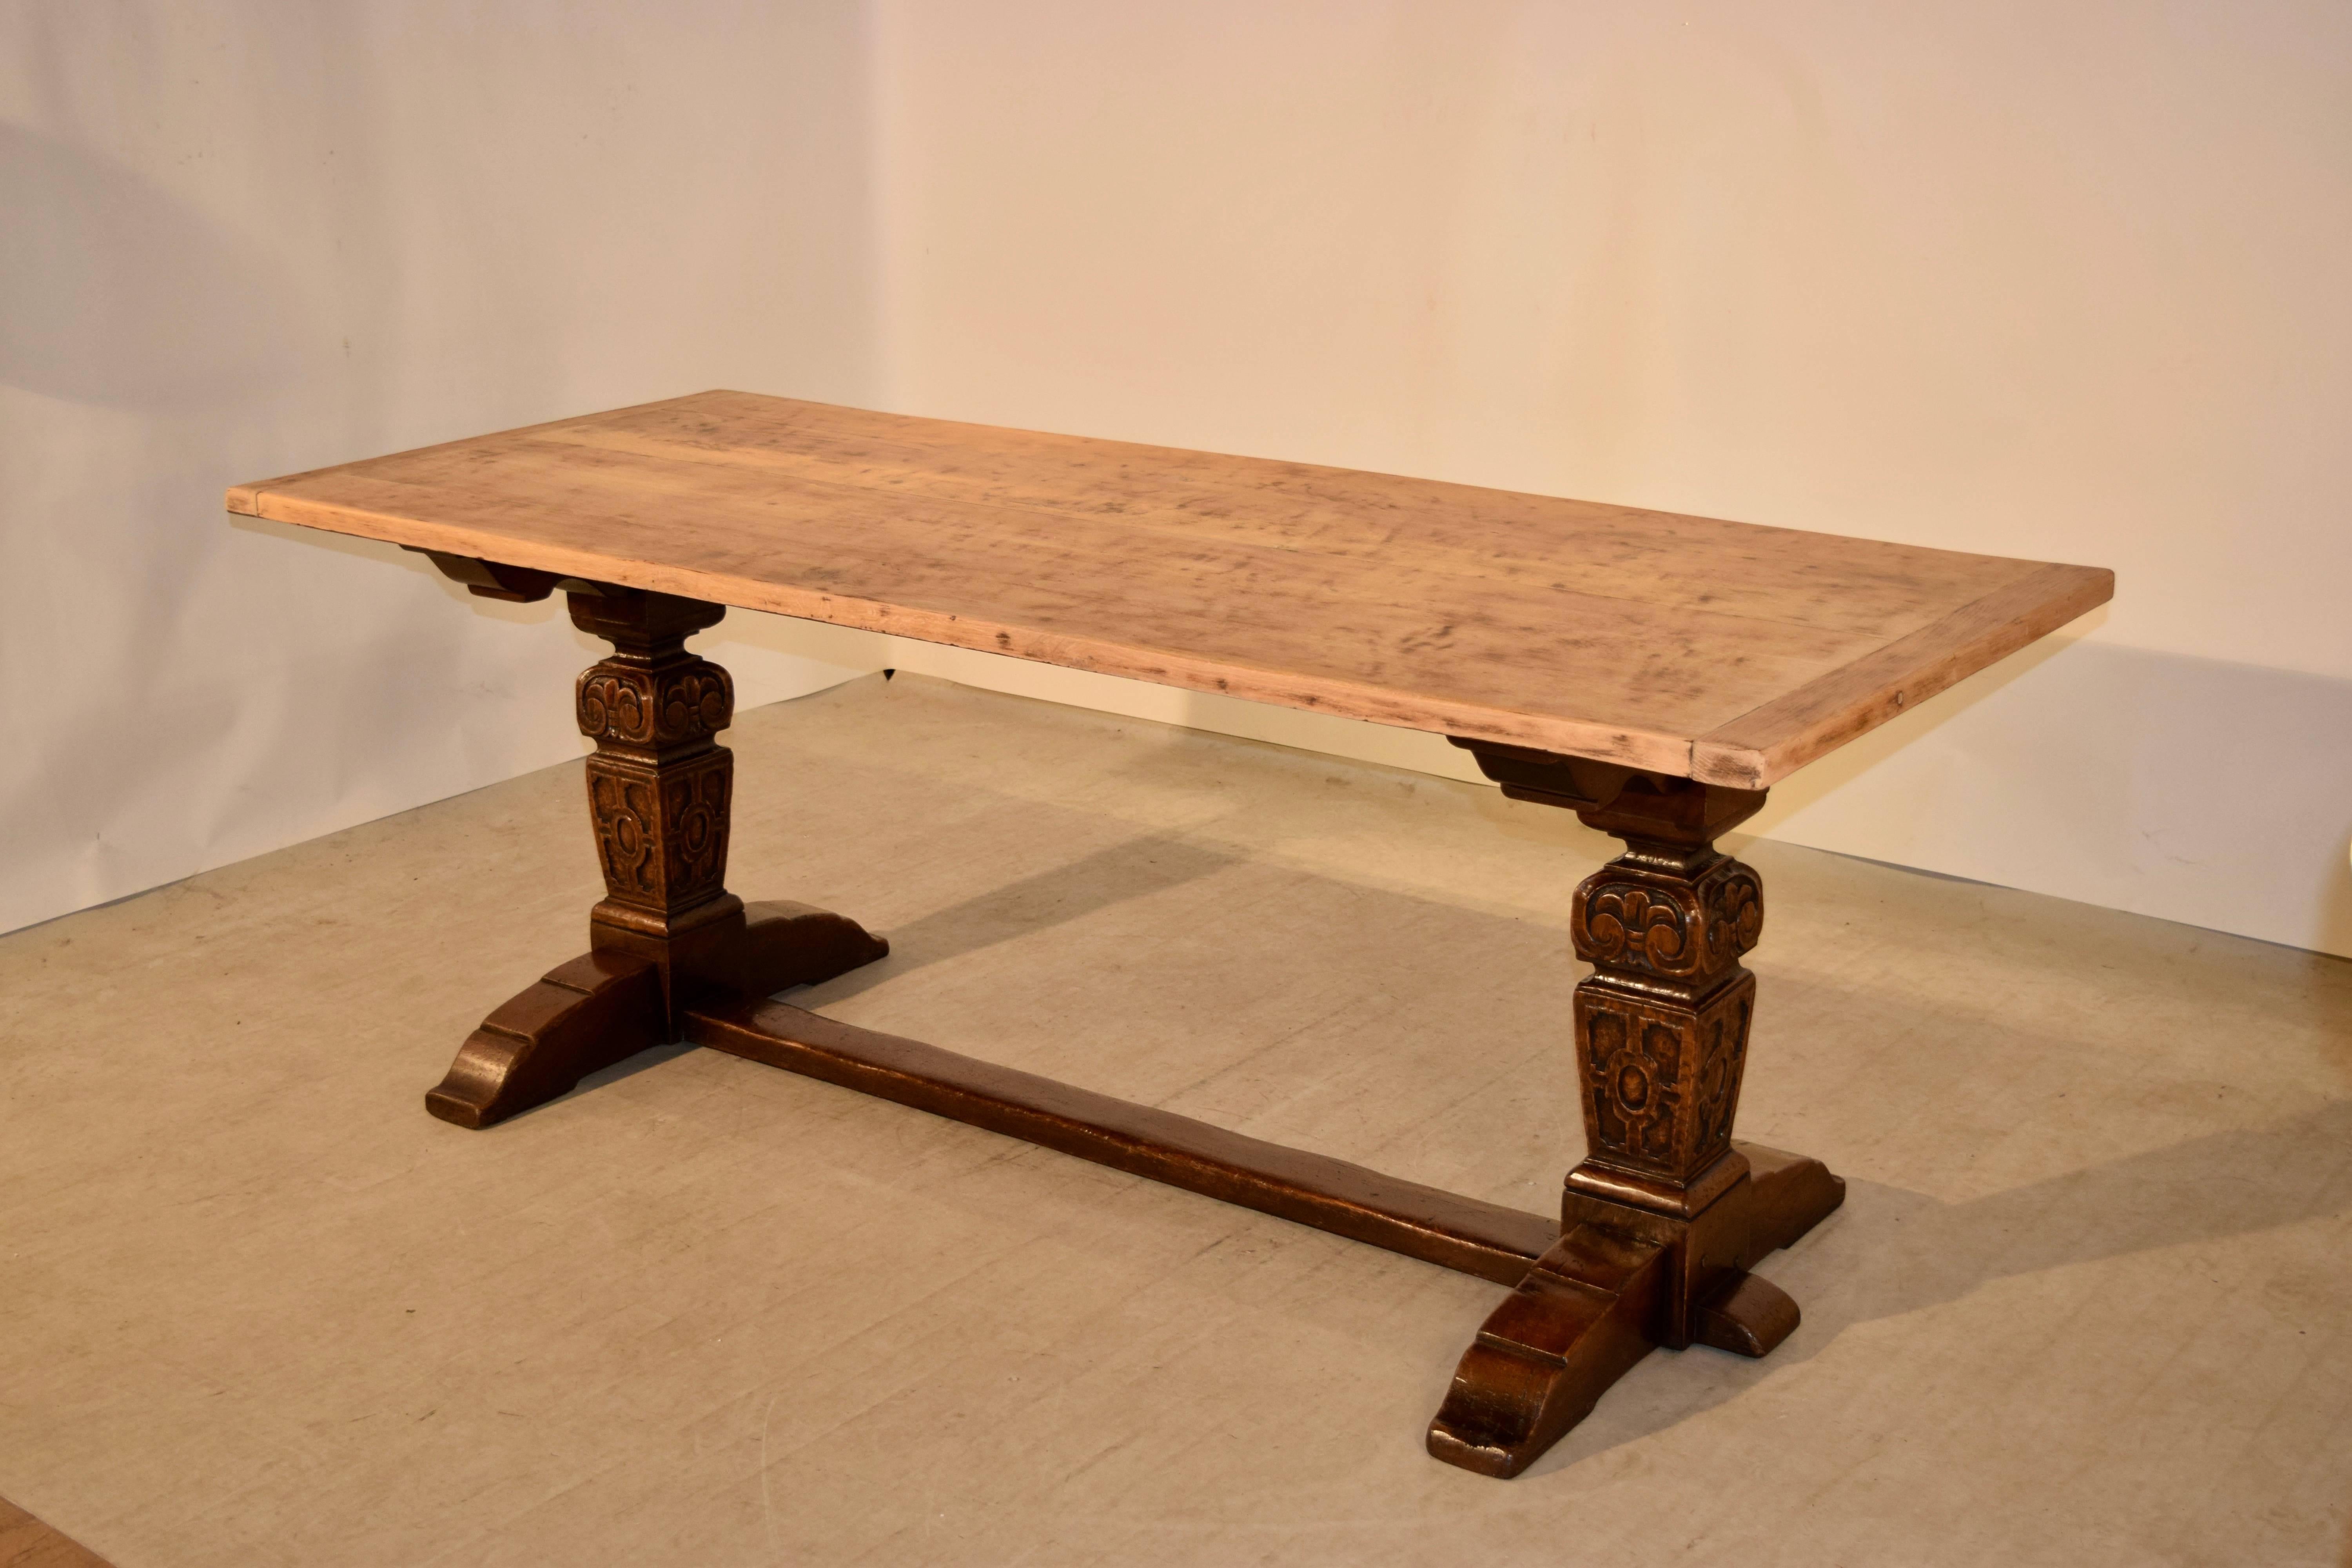 Late 19th century oak trestle table from England. The top is scrubbed to its natural color oak, and is wonderfully contrasted to the base. The legs are hand-turned square and carved decorated and are supported upon a trestle base with attaching